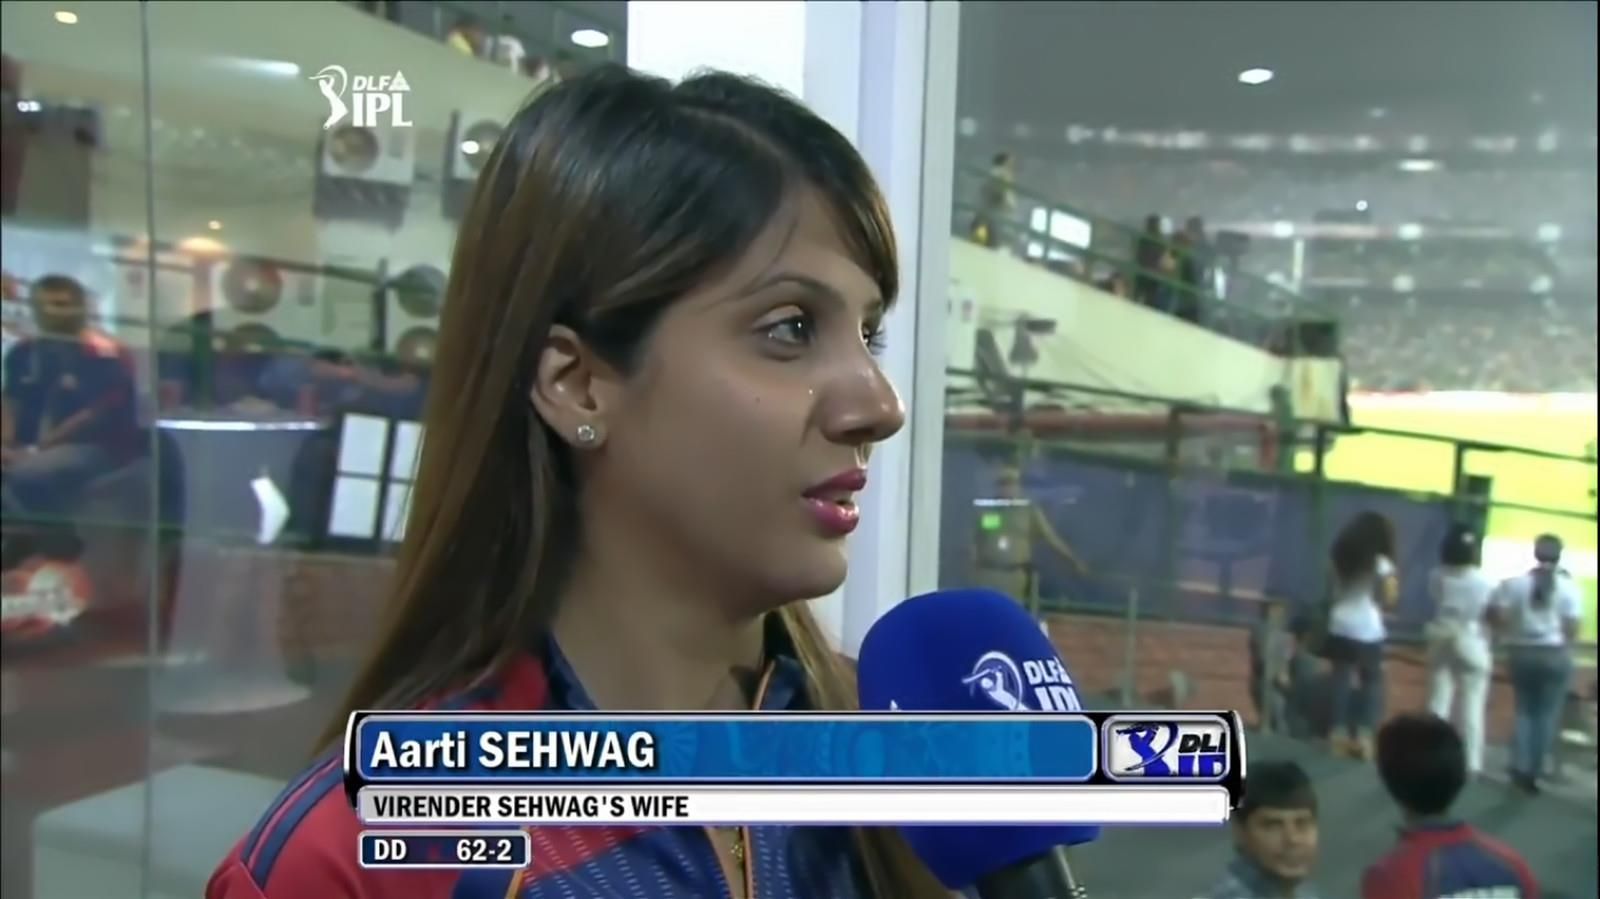 Aarti Sehwag in the IPL match